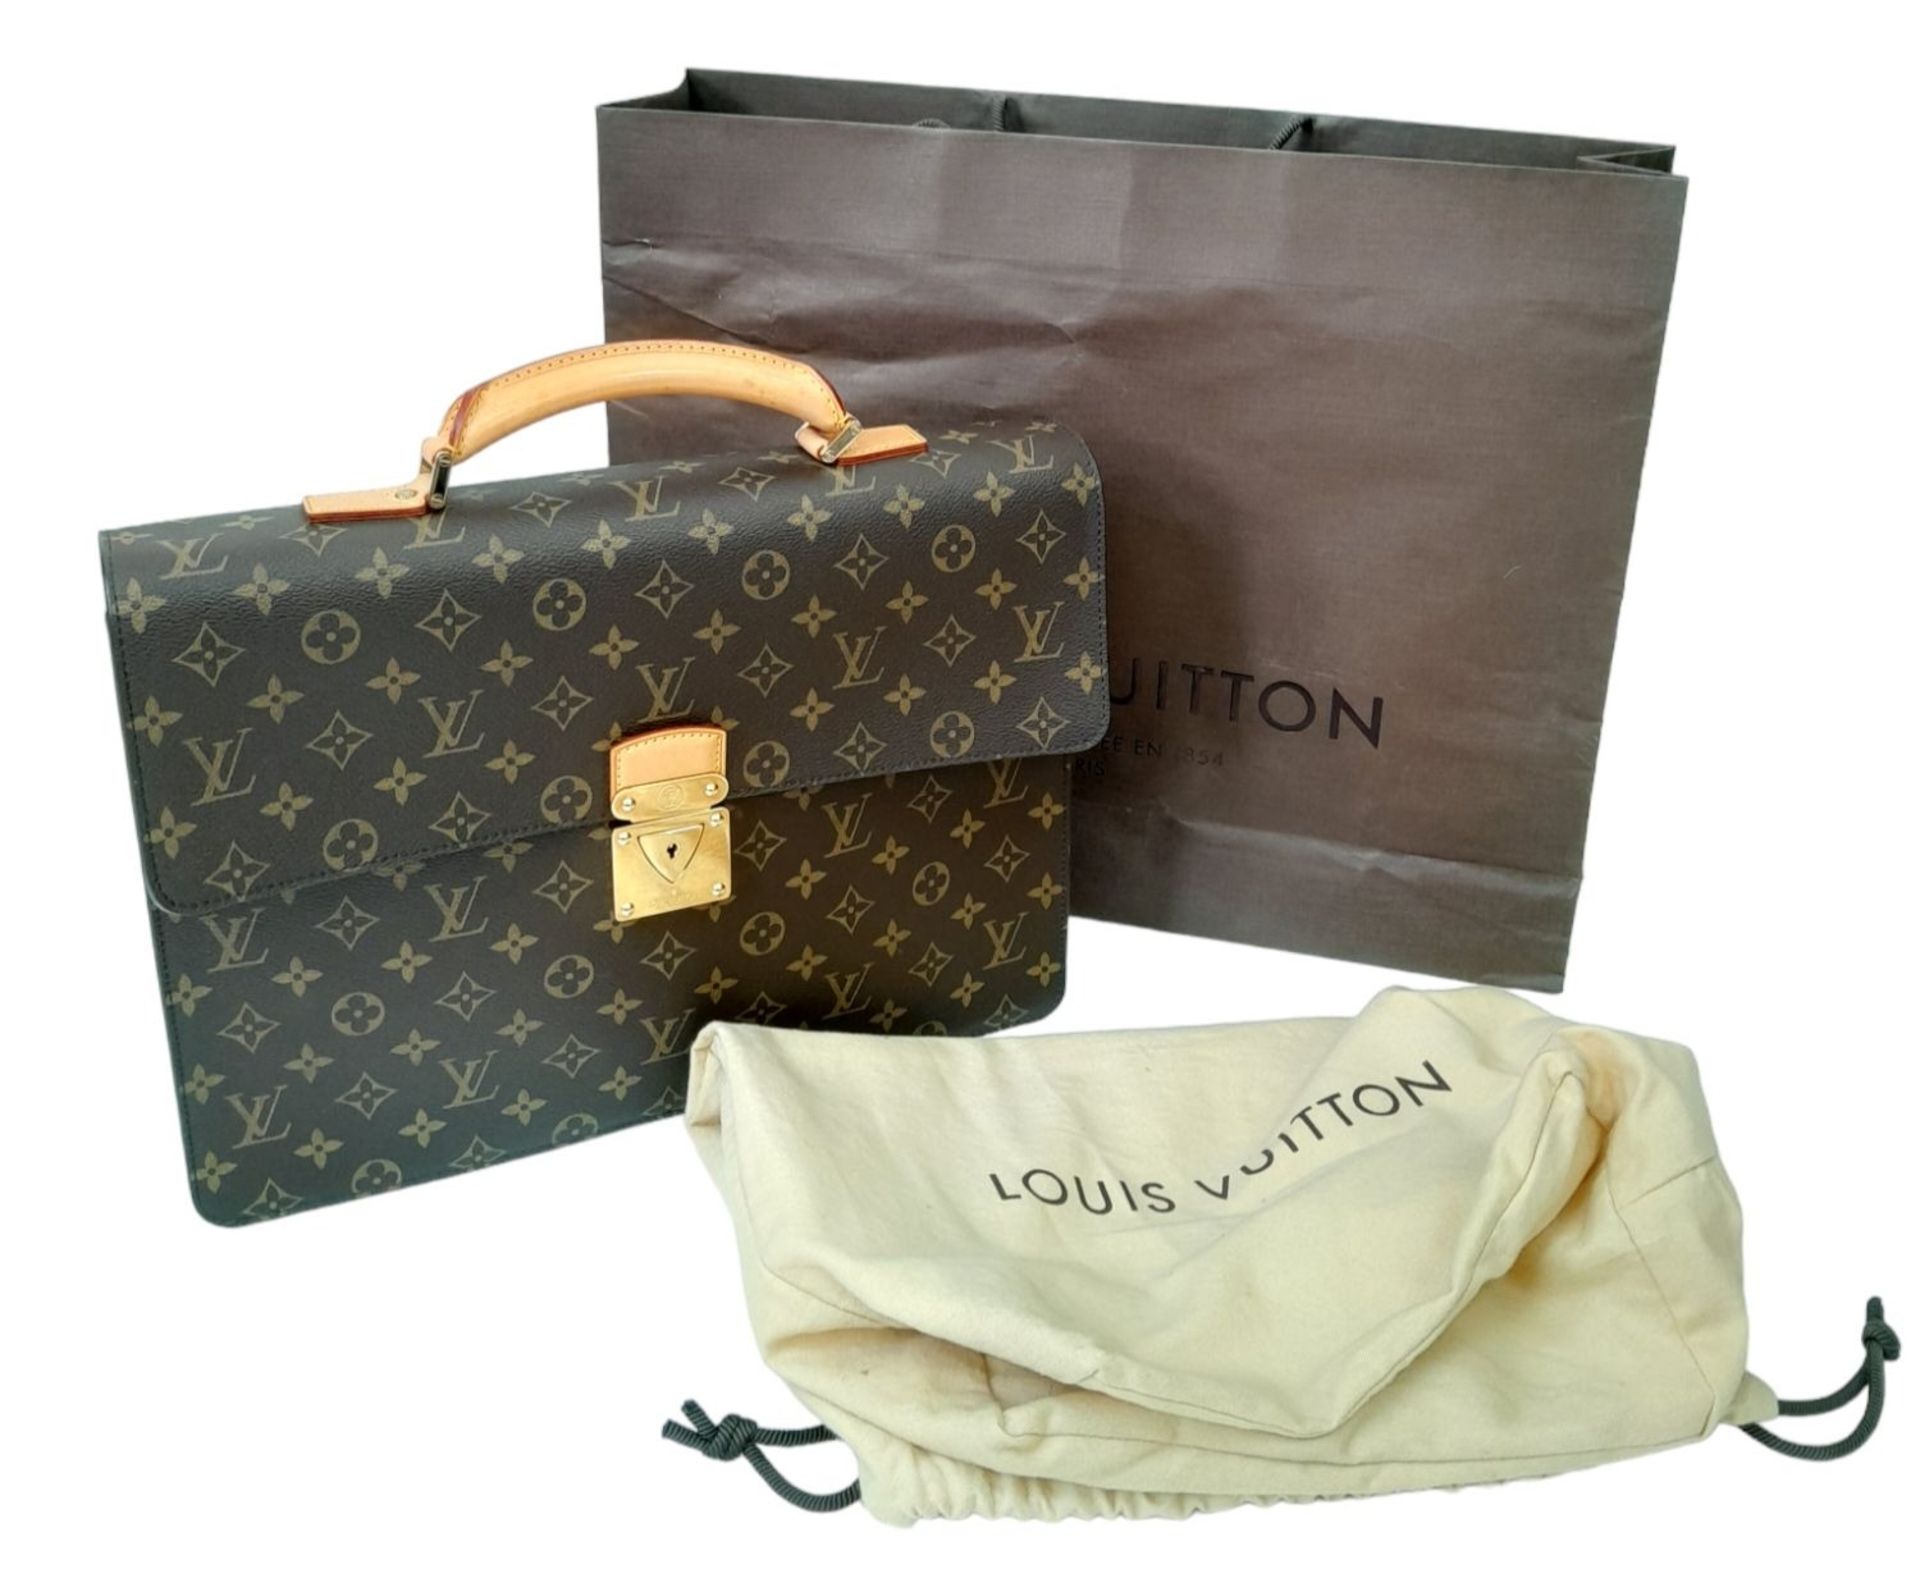 AN IMMACULATE LOUIS VUITTON CLASSIC BRIEF CASE IN UNUSED CONDITION WITH ORIGINAL DUST COVER . 38 X - Image 6 of 10